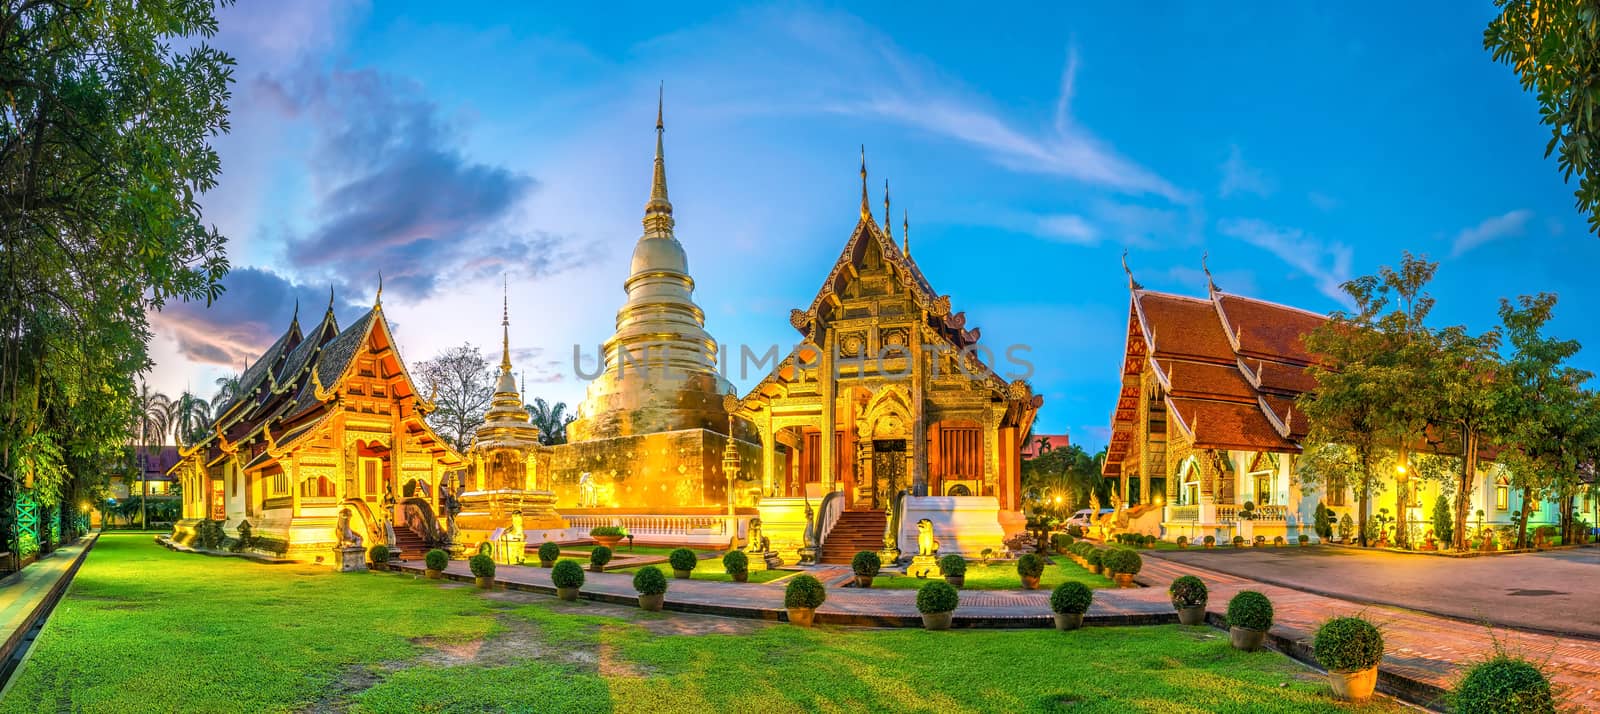 Panorama view of Wat Phra Singh temple in the old town center of Chiang Mai,Thailand